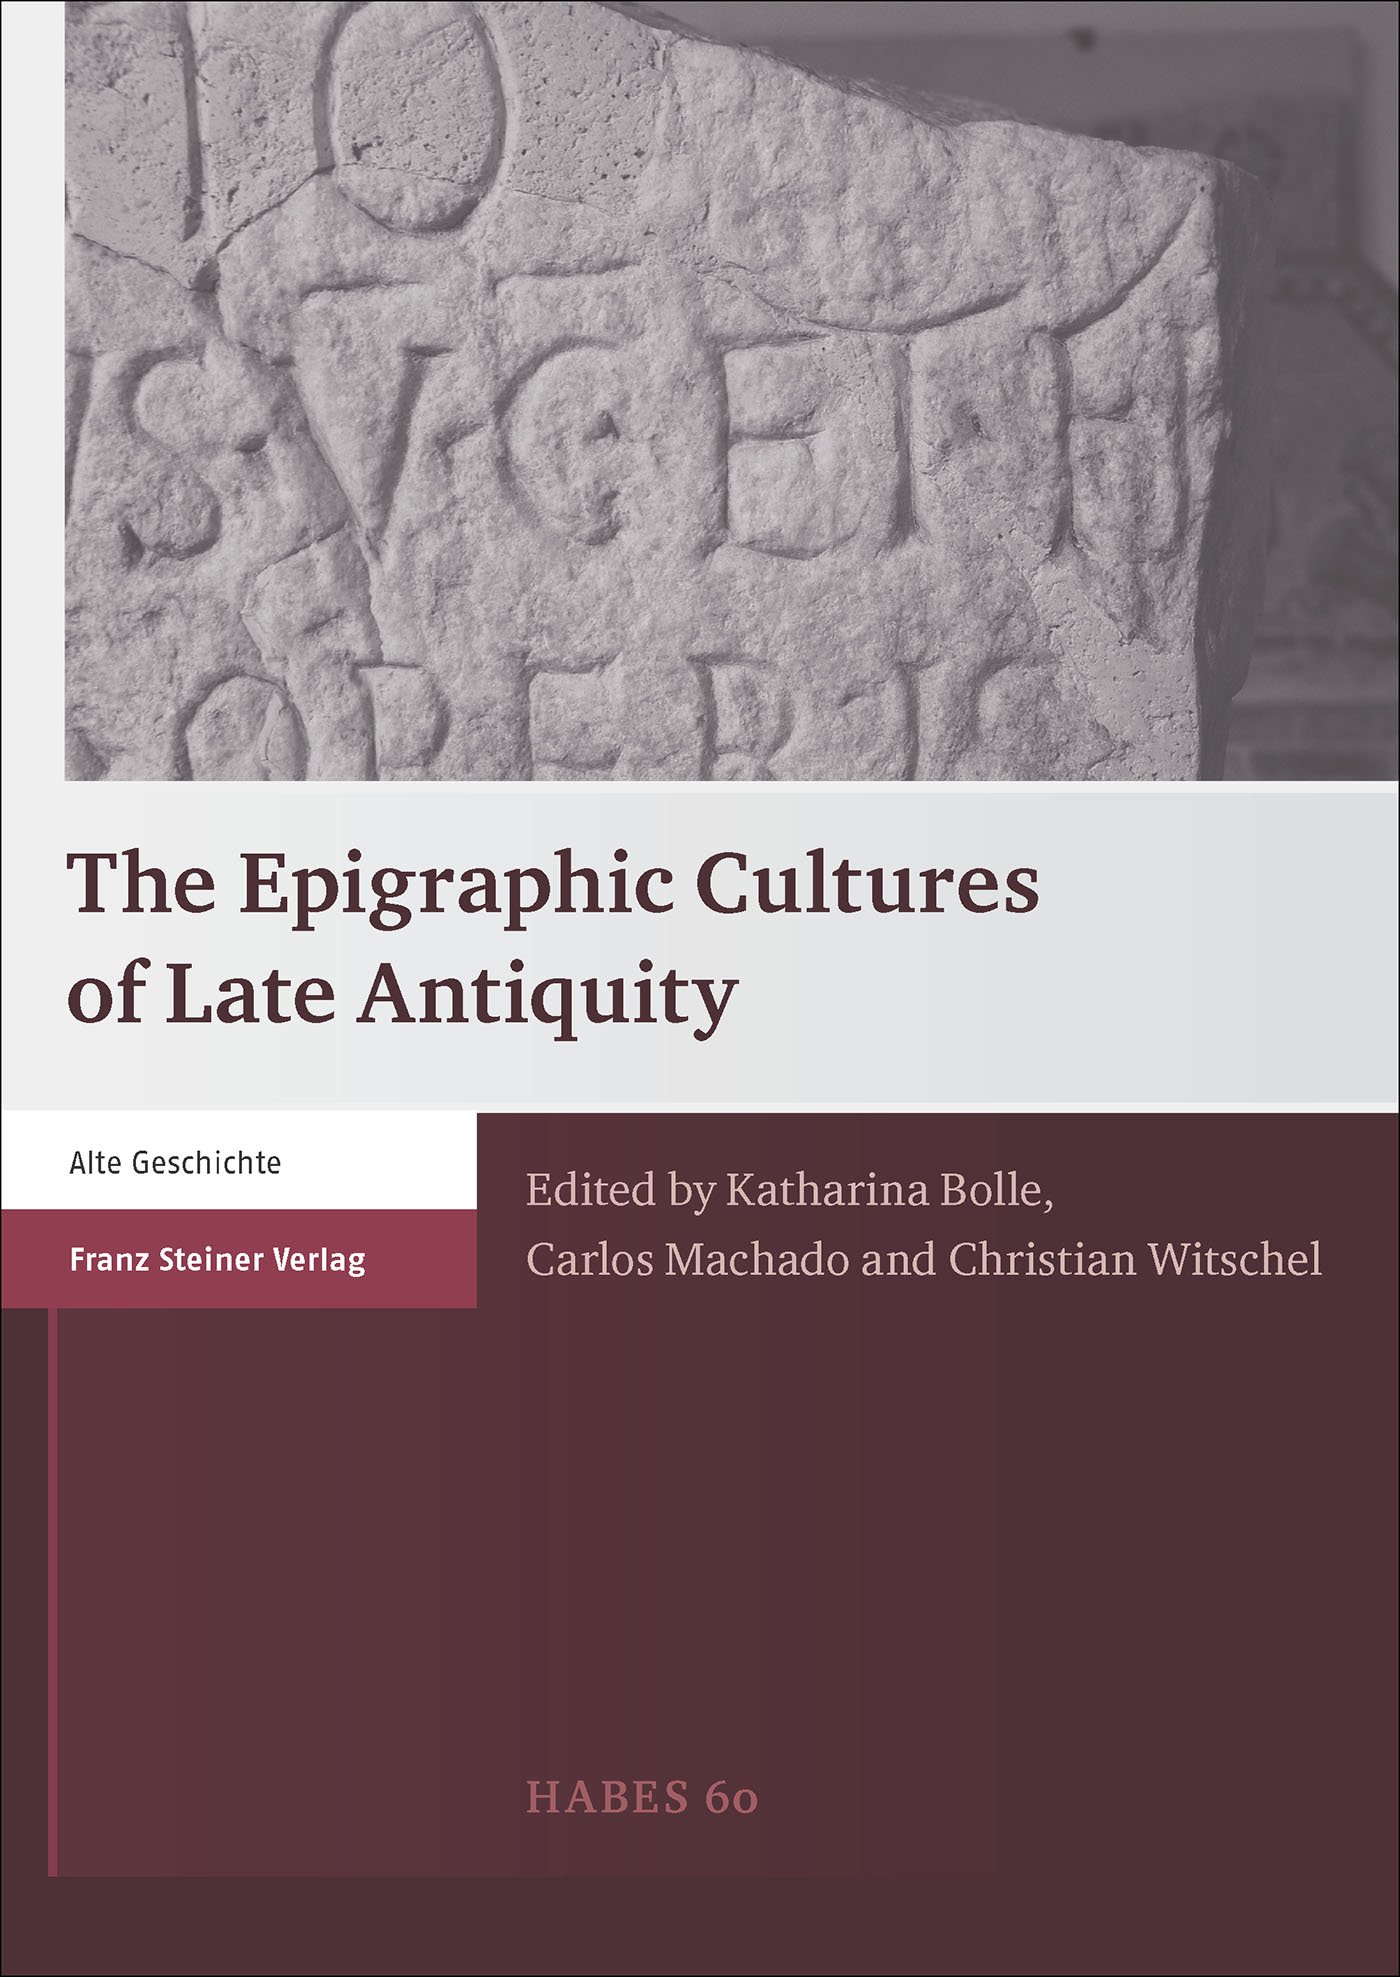 The Epigraphic Cultures of Late Antiquity